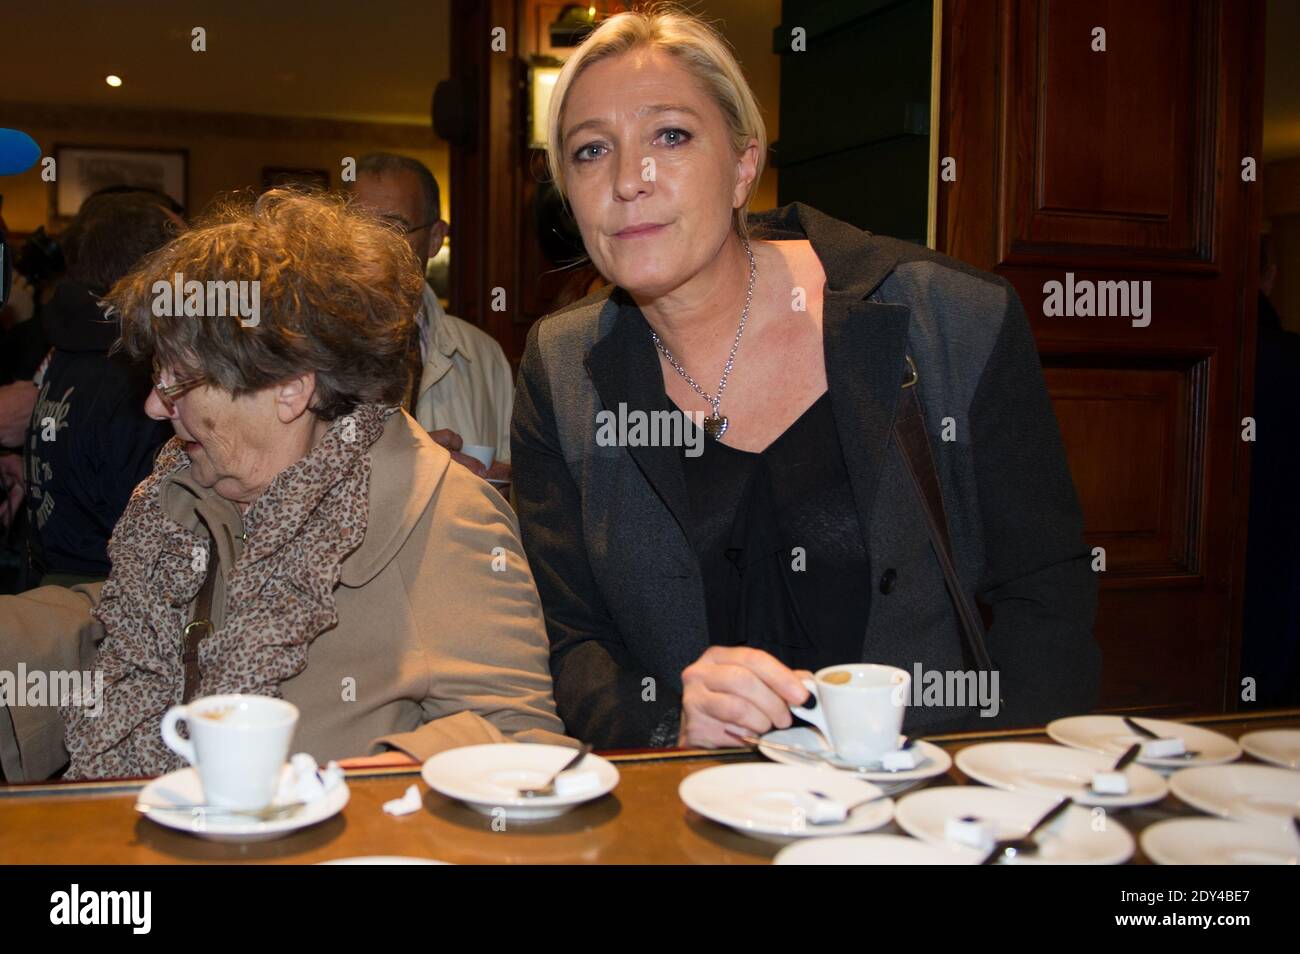 Exclusive. French far-right Front National party president Marine Le Pen  enjoys a coffee during her visit to Calais, northern France on October 24,  2014. Le Pen came to the northern port town